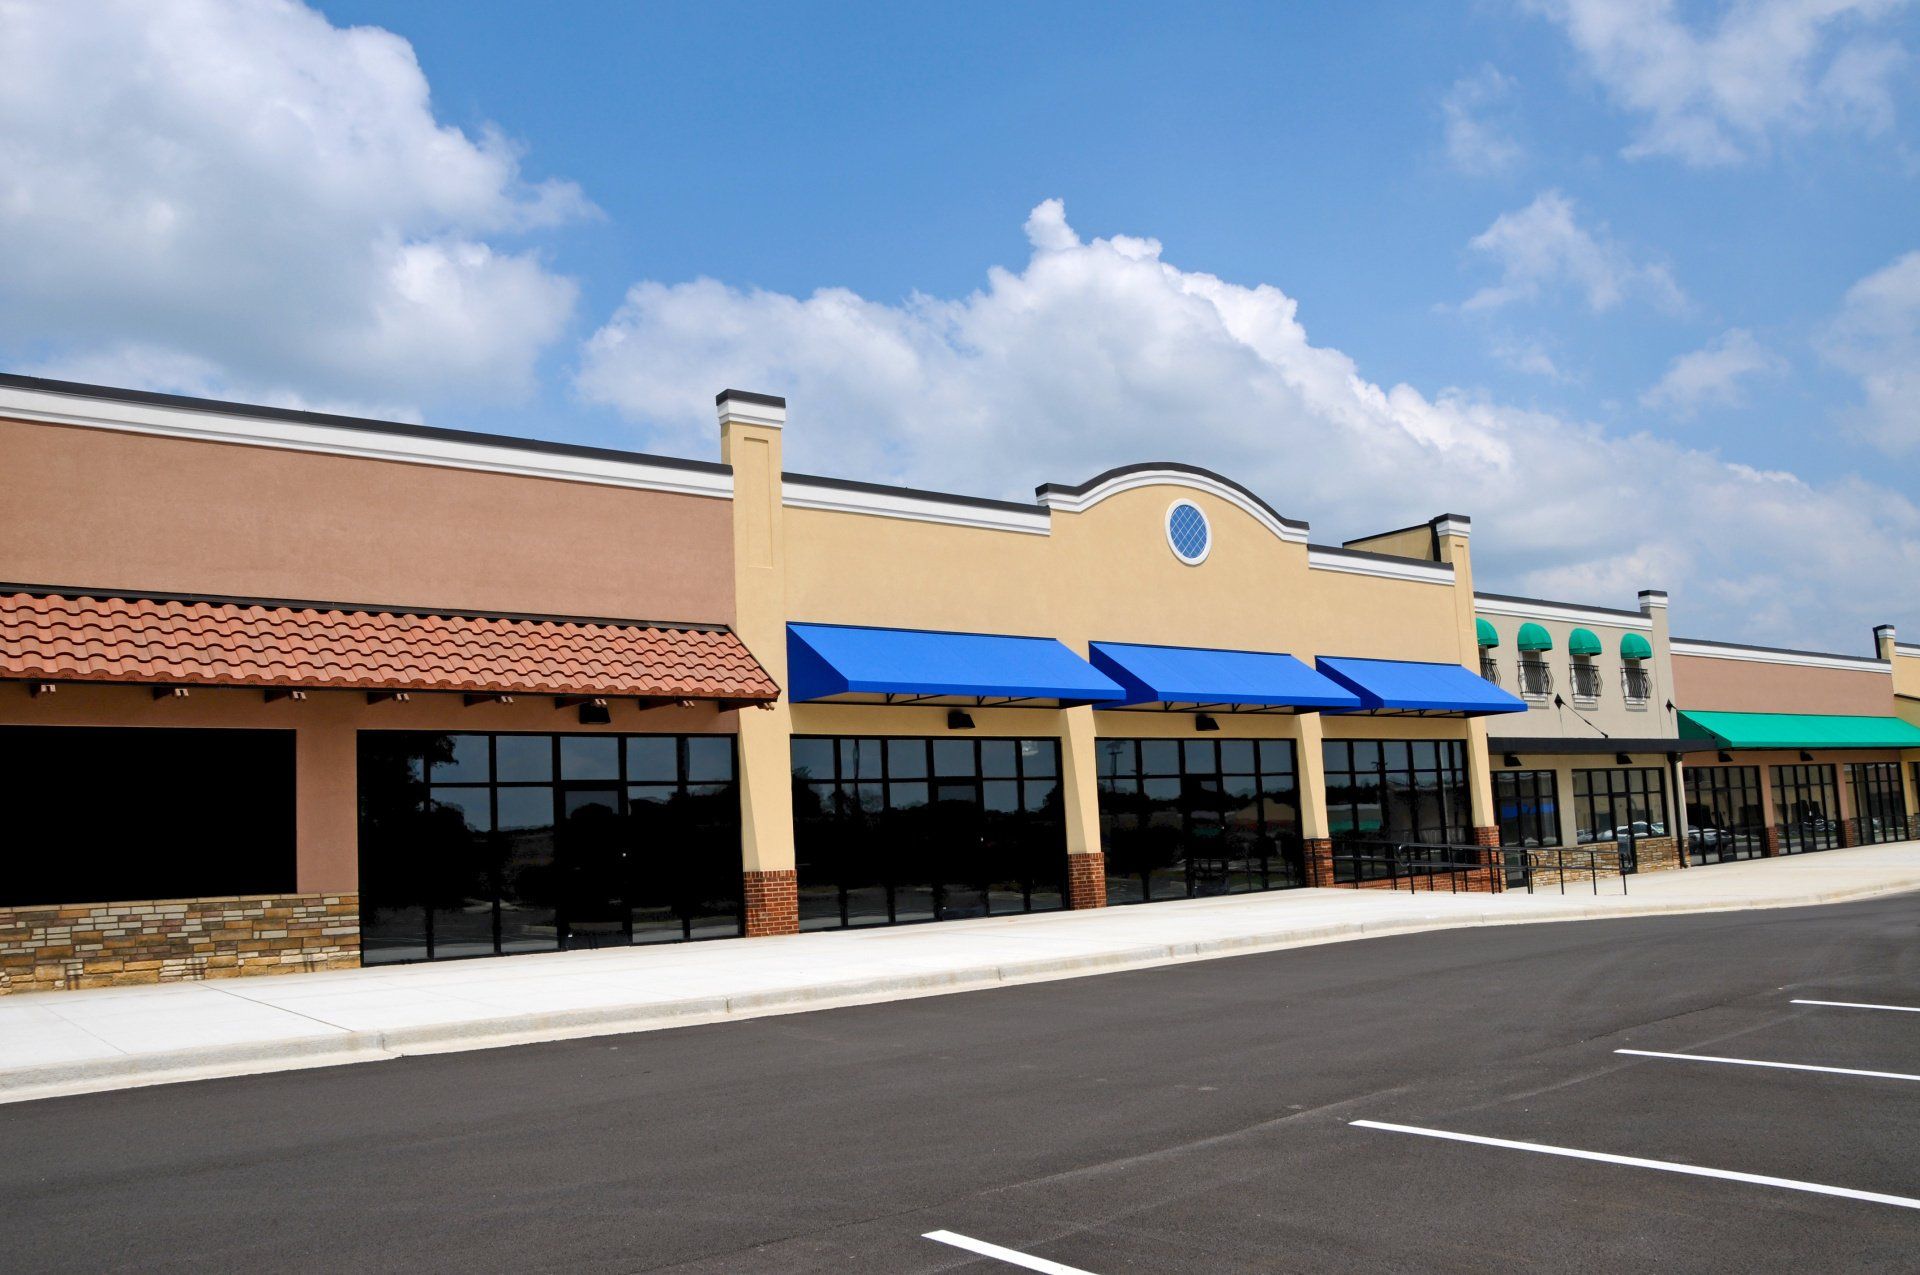 empty strip mall with awnings